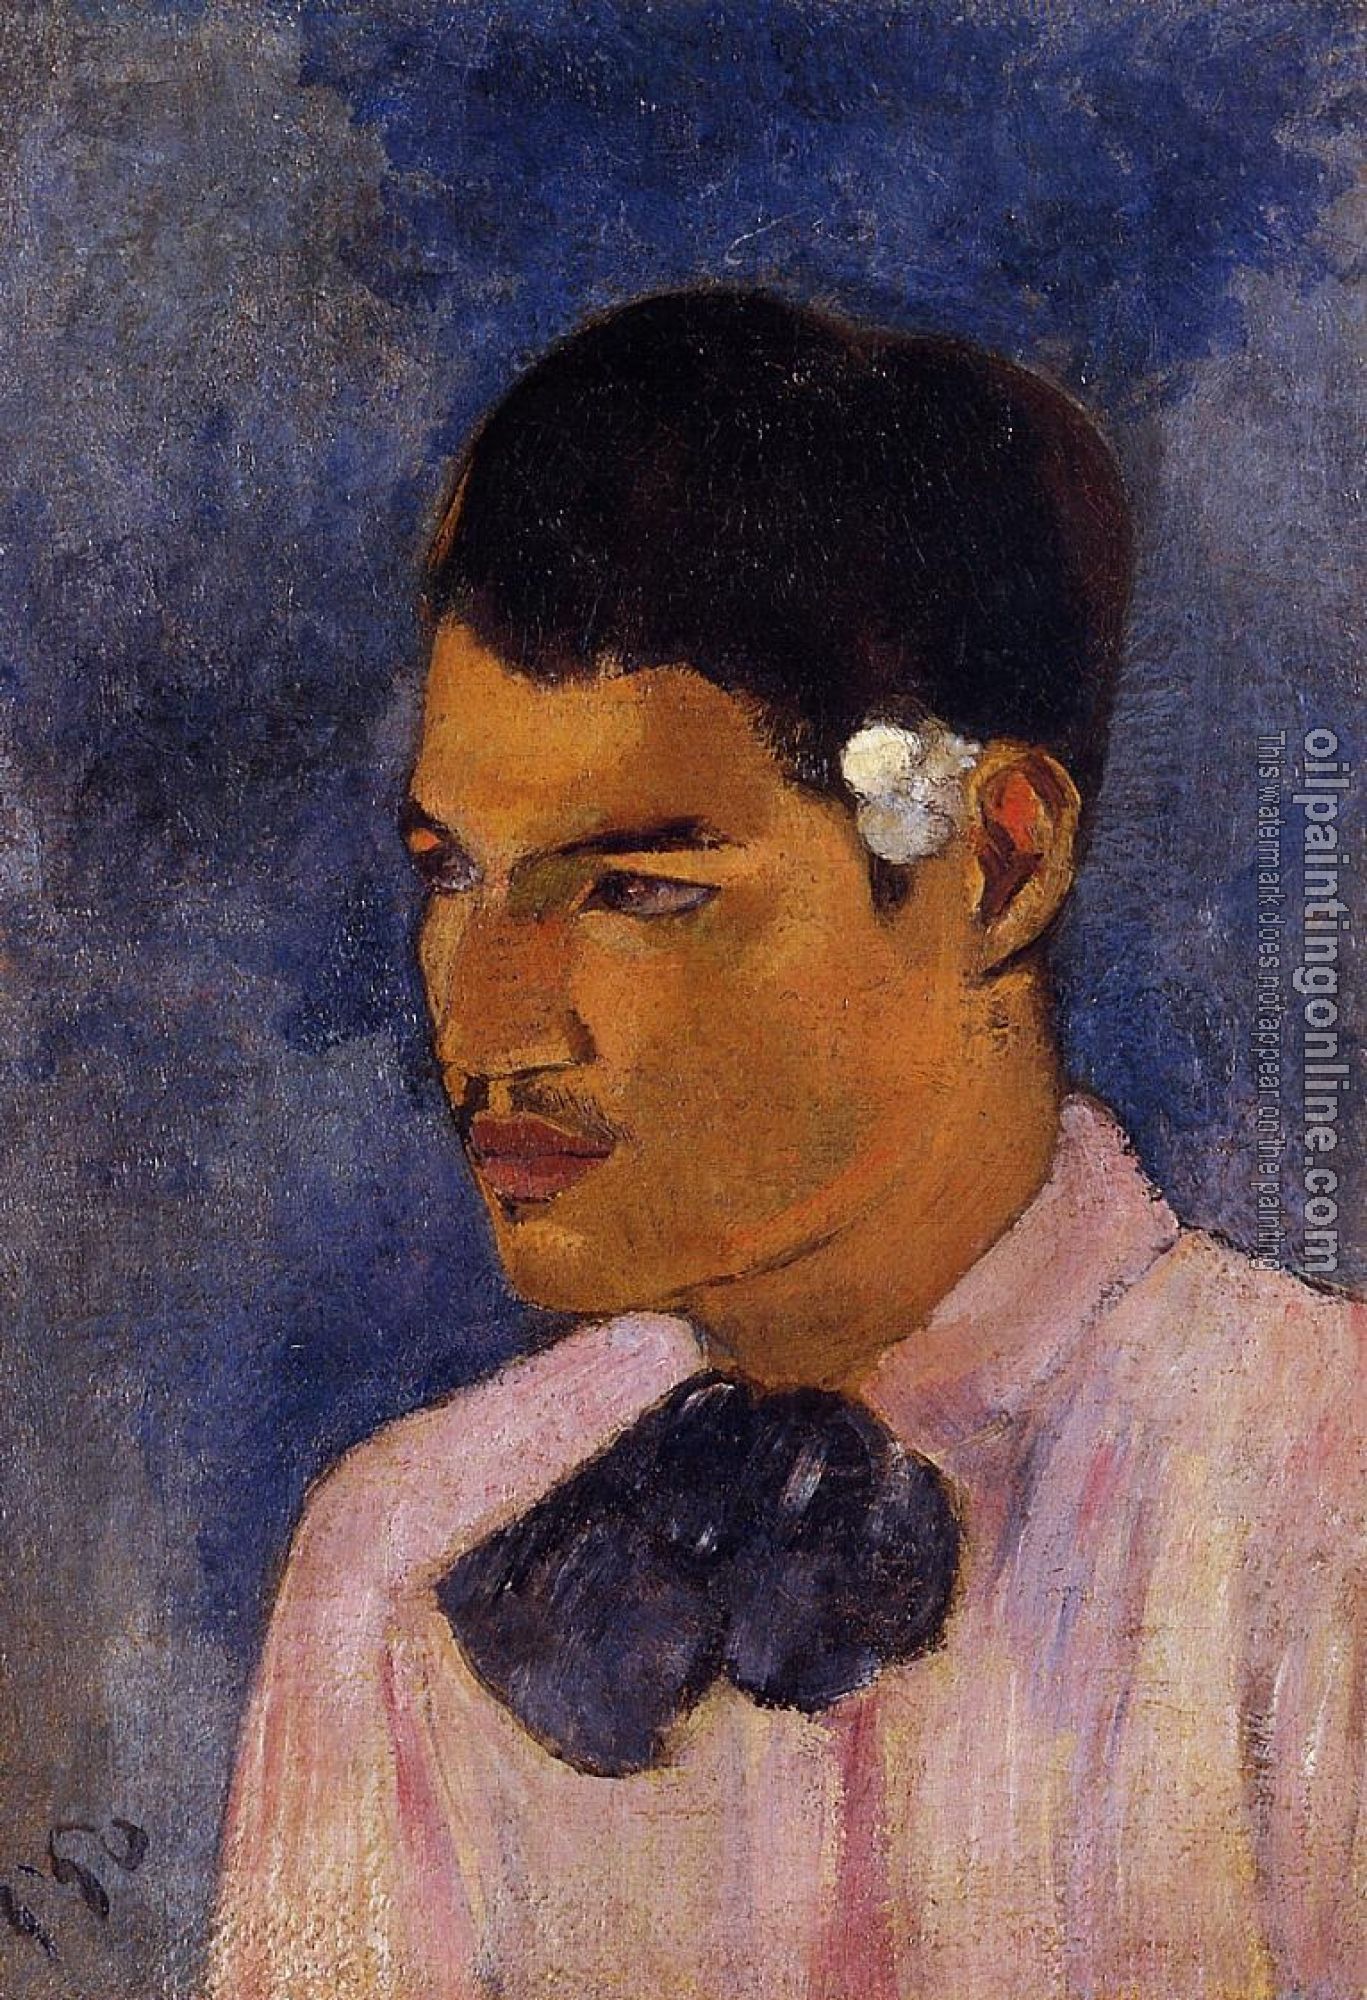 Gauguin, Paul - Young Man with a Flower